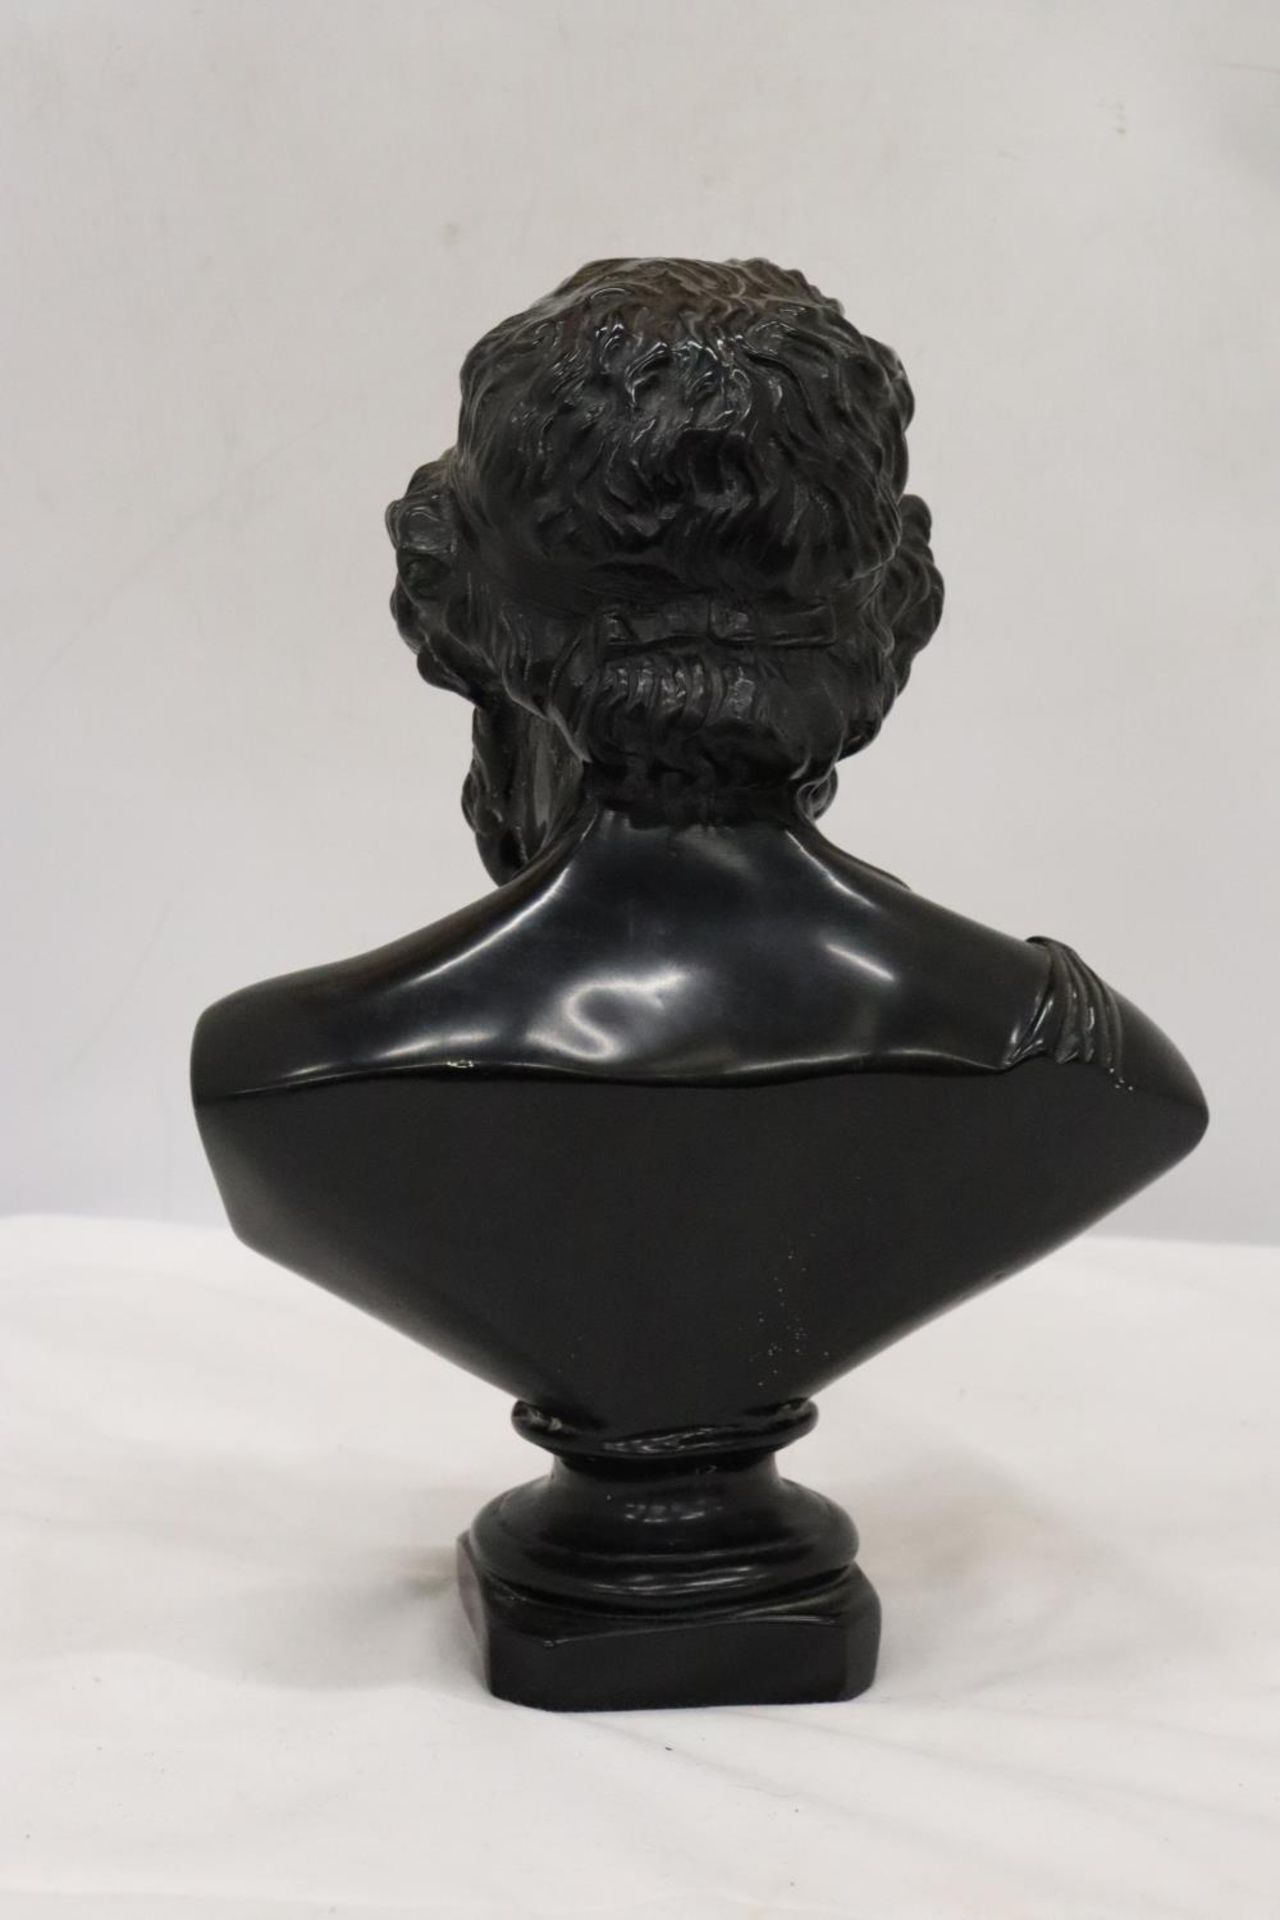 A HEAVY RESIN BUST OF CLASSICAL GREEK POET TITLED - 'HOMERE', HEIGHT 30 CM - Image 3 of 6